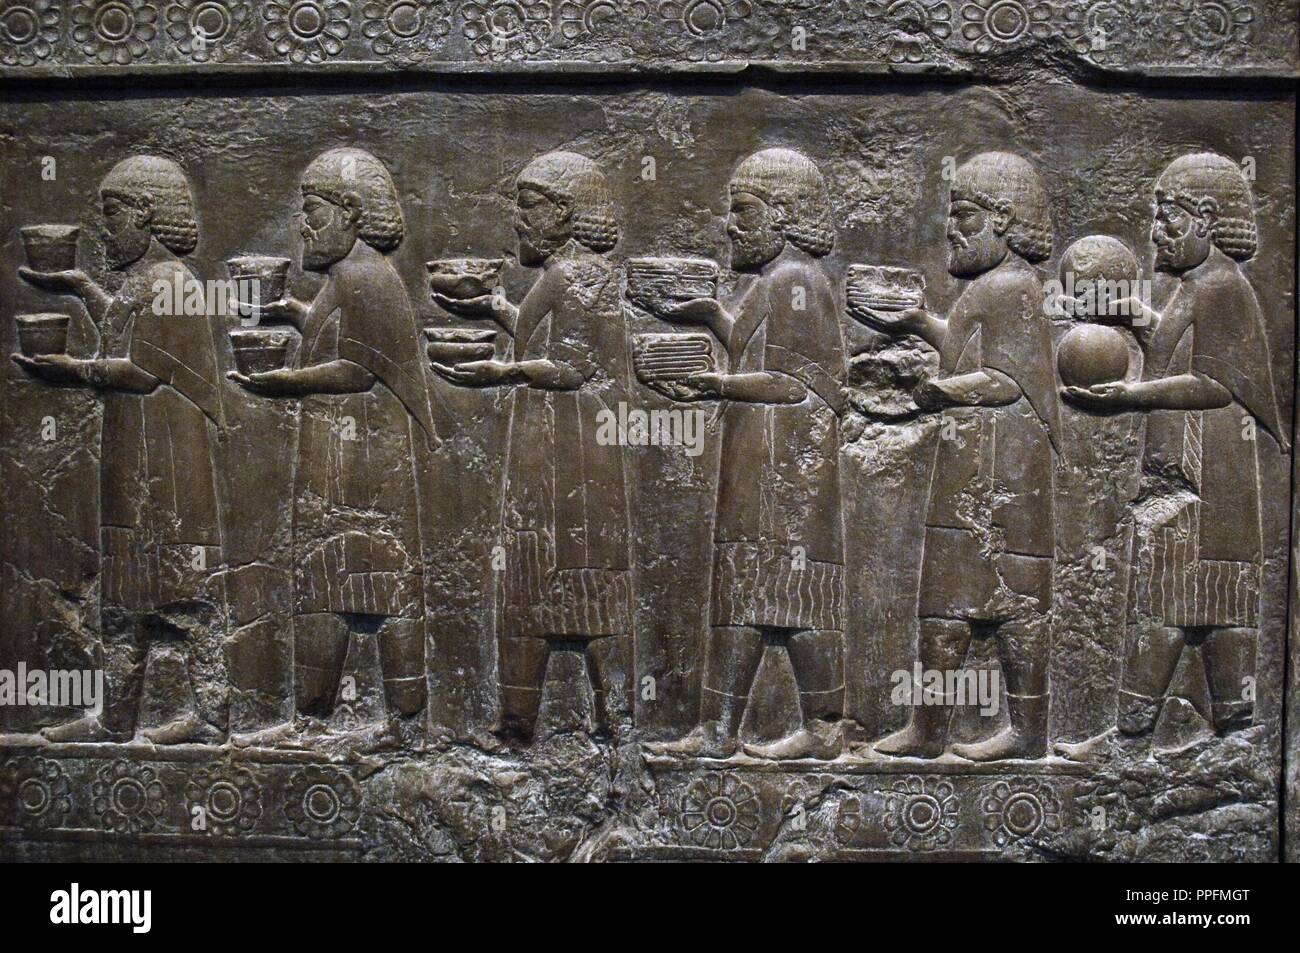 Palace of Darius I (522-486 BC). Reliefs of the outer wall of the staircase of the Apadana or Reception hall depicting Ionians in procession carrying offerings. Persepolis. Copy by the original preserved in their original place (Iran), 1892. British Museum. London. England. United Kingdom. Stock Photo